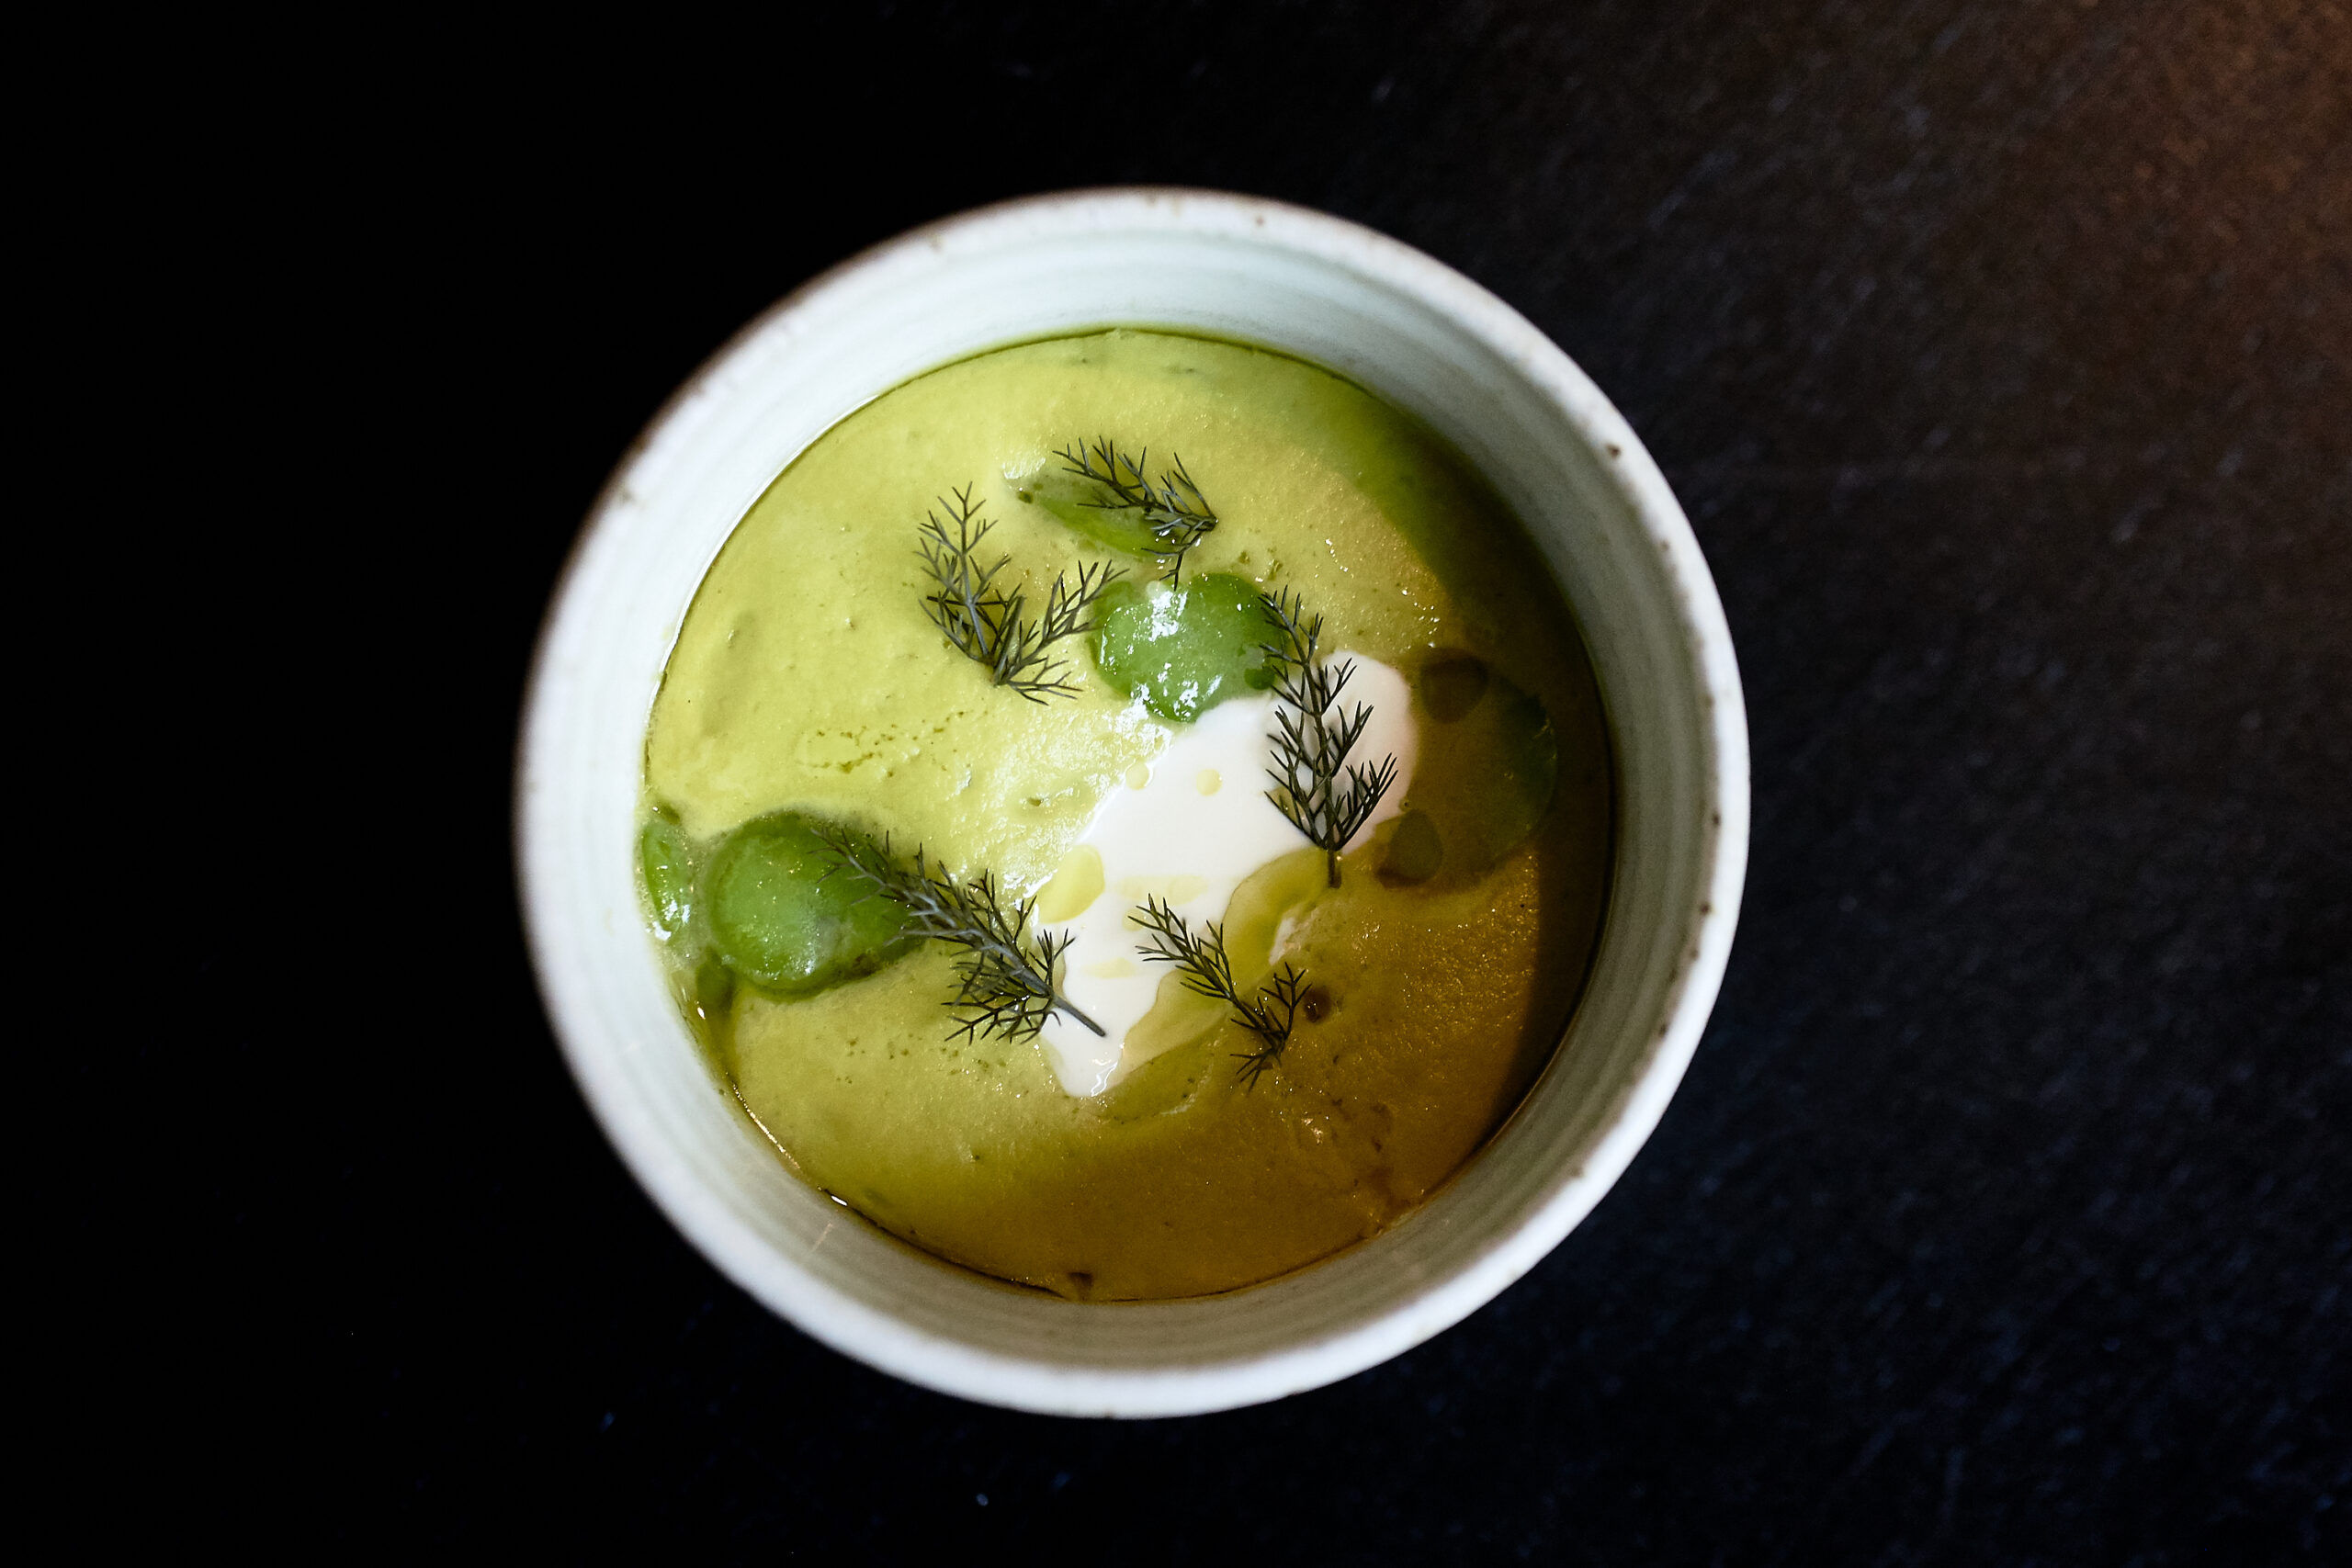 A green broad bean soup served in a small ceramic bowl on a black table for the four-course lunch at etch.